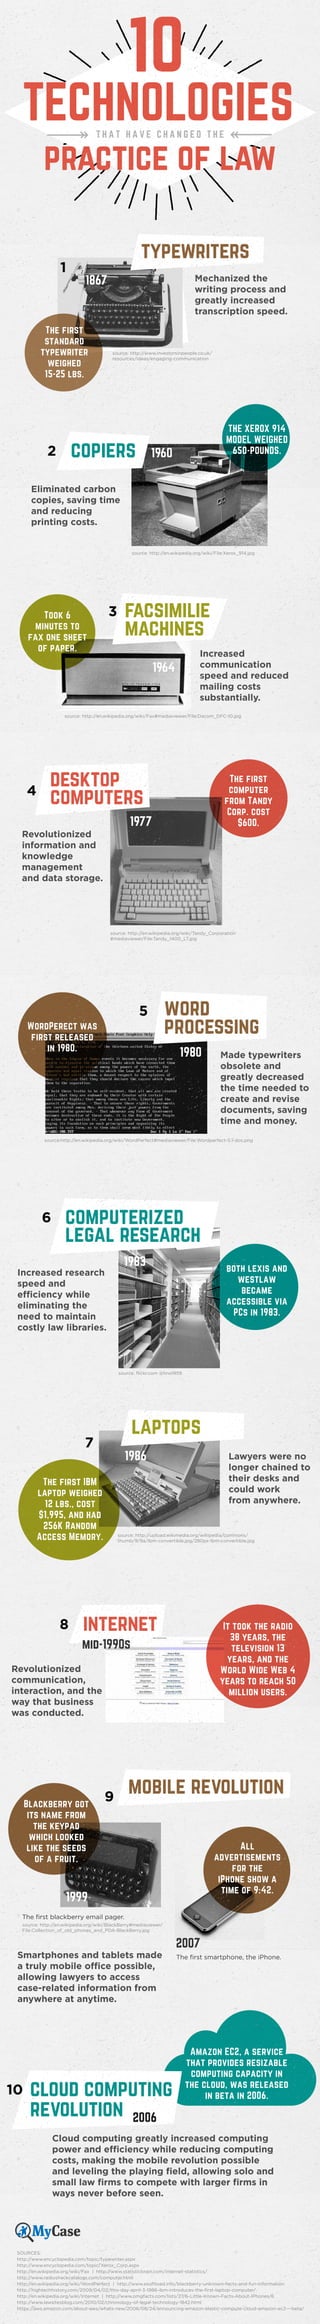 computerized
legal research
1983
6
TECHNOLOGIES
practice of law
10
T H A T H A V E C H A N G E D T H E
5 word
processing
1980
1
typewriters
1867
The first
standard
typewriter
weighed
15-25 lbs.
source: http://en.wikipedia.org/wiki/File:Xerox_914.jpg
copiers 19602
THE XEROX 914
MODEL WEIGHED
650-POUNDS.
3 facsimilie
machines
1964
Took 6
minutes to
fax one sheet
of paper.
desktop
computers
1977
4
The first
computer
from Tandy
Corp. cost
$600.
source:http://en.wikipedia.org/wiki/WordPerfect#mediaviewer/File:Wordperfect-5.1-dos.png
source: http://en.wikipedia.org/wiki/Tandy_Corporation
#mediaviewer/File:Tandy_1400_LT.jpg
internet
mid-1990s
8 It took the radio
38 years, the
television 13
years, and the
World Wide Web 4
years to reach 50
million users.
source: flickr.com @lino1959
source: http://www.investorsinpeople.co.uk/
resources/ideas/engaging-communication
7
laptops
1986
The first IBM
laptop weighed
12 lbs., cost
$1,995, and had
256K Random
Access Memory. source: http://upload.wikimedia.org/wikipedia/commons/
thumb/9/9a/Ibm-convertible.jpg/280px-Ibm-convertible.jpg
9
mobile revolution
source: http://en.wikipedia.org/wiki/Fax#mediaviewer/File:Dacom_DFC-10.jpg
WordPerect was
first released
in 1980.
both lexis and
westlaw
became
accessible via
PCs in 1983.
source: http://en.wikipedia.org/wiki/BlackBerry#mediaviewer/
File:Collection_of_old_phones_and_PDA-BlackBerry.jpg
1999
Blackberry got
its name from
the keypad
which looked
like the seeds
of a fruit.
All
advertisements
for the
iPhone show a
time of 9:42.
2007
SOURCES:
http://www.encyclopedia.com/topic/typewriter.aspx
http://www.encyclopedia.com/topic/Xerox_Corp.aspx
http://en.wikipedia.org/wiki/Fax | http://www.statisticbrain.com/internet-statistics/
http://www.radioshackcatalogs.com/computer.html
http://en.wikipedia.org/wiki/WordPerfect | http://www.esoftload.info/blackberry-unknown-facts-and-fun-information
http://hightechhistory.com/2009/04/02/this-day-april-3-1986-ibm-introduces-the-first-laptop-computer/
http://en.wikipedia.org/wiki/Internet | http://www.omgfacts.com/lists/27/6-Little-Known-Facts-About-IPhones/6
http://www.lawsitesblog.com/2010/02/chronology-of-legal-technology-1842.html
https://aws.amazon.com/about-aws/whats-new/2006/08/24/announcing-amazon-elastic-compute-cloud-amazon-ec2---beta/
Amazon EC2, a service
that provides resizable
computing capacity in
the cloud, was released
in beta in 2006.
The first blackberry email pager.
The first smartphone, the iPhone.
Mechanized the
writing process and
greatly increased
transcription speed.
Eliminated carbon
copies, saving time
and reducing
printing costs.
Increased
communication
speed and reduced
mailing costs
substantially.
Revolutionized
information and
knowledge
management
and data storage.
Made typewriters
obsolete and
greatly decreased
the time needed to
create and revise
documents, saving
time and money.
Increased research
speed and
efficiency while
eliminating the
need to maintain
costly law libraries.
Lawyers were no
longer chained to
their desks and
could work
from anywhere.
Revolutionized
communication,
interaction, and the
way that business
was conducted.
Smartphones and tablets made
a truly mobile office possible,
allowing lawyers to access
case-related information from
anywhere at anytime.
Cloud computing greatly increased computing
power and efficiency while reducing computing
costs, making the mobile revolution possible
and leveling the playing field, allowing solo and
small law firms to compete with larger firms in
ways never before seen.
cloud computing
revolution 2006
10
 